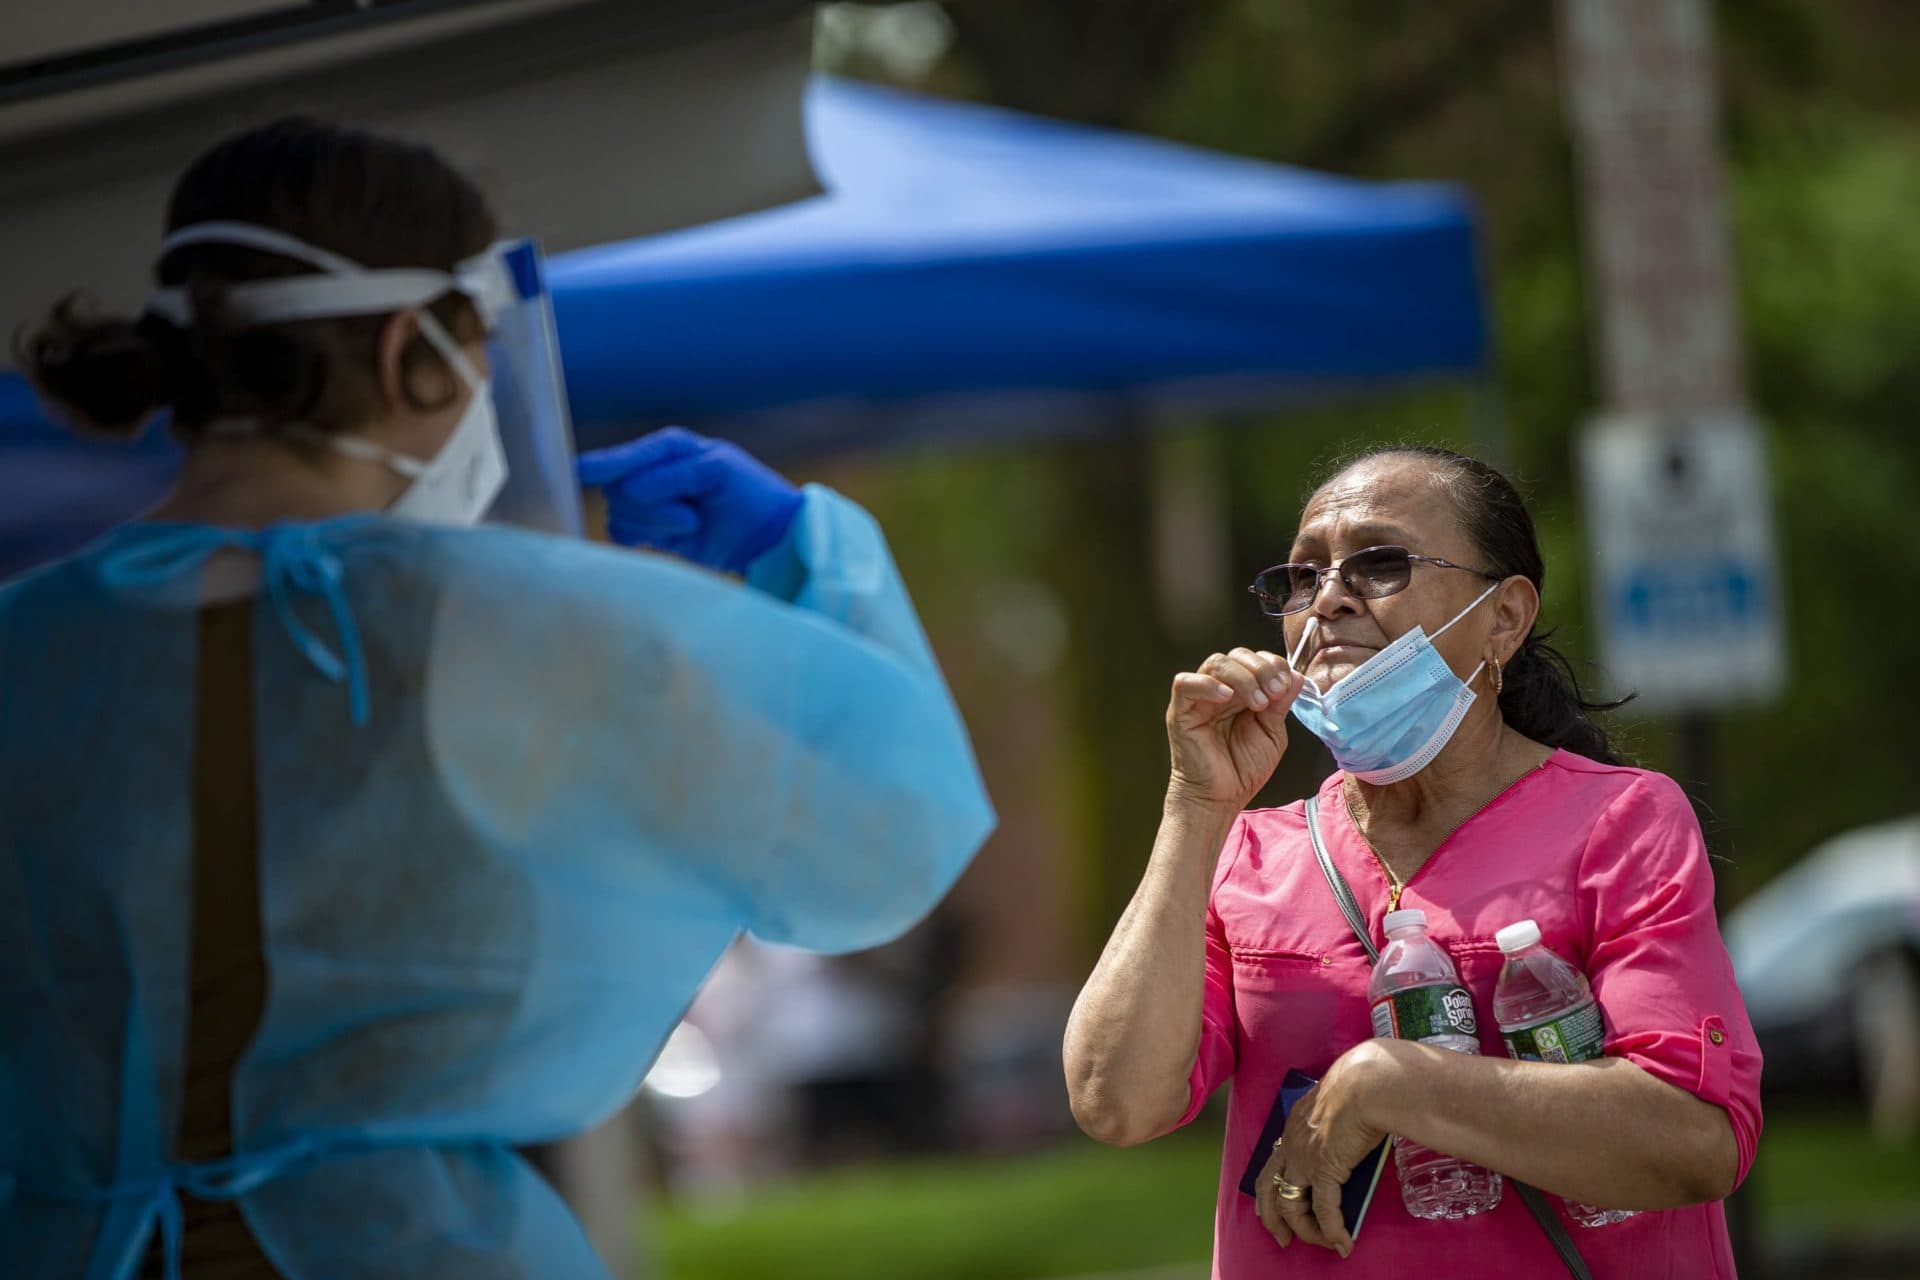 A Chelsea resident is being directed by a healthcare worker before inserting a swab up her nose during free COVID-19 testing offered by the state in Chelsea Square. (Jesse Costa/WBUR)